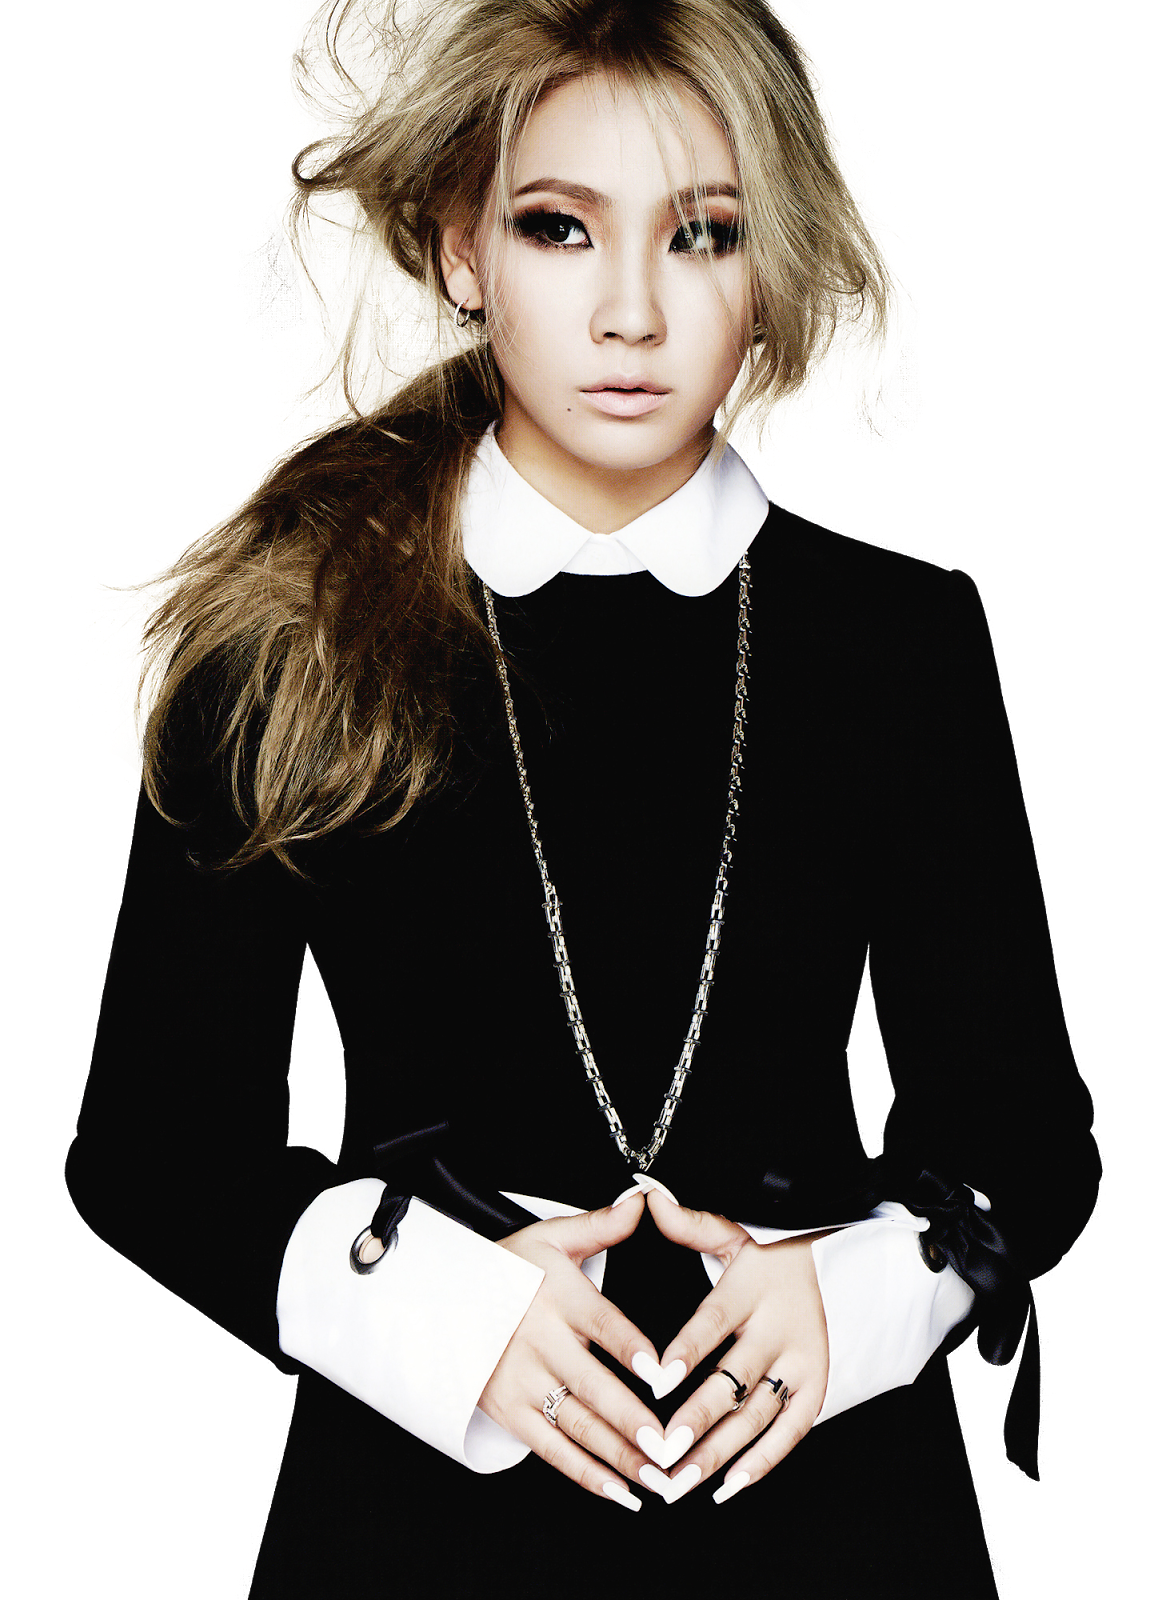 Cantor Coreano Cl singer PNG